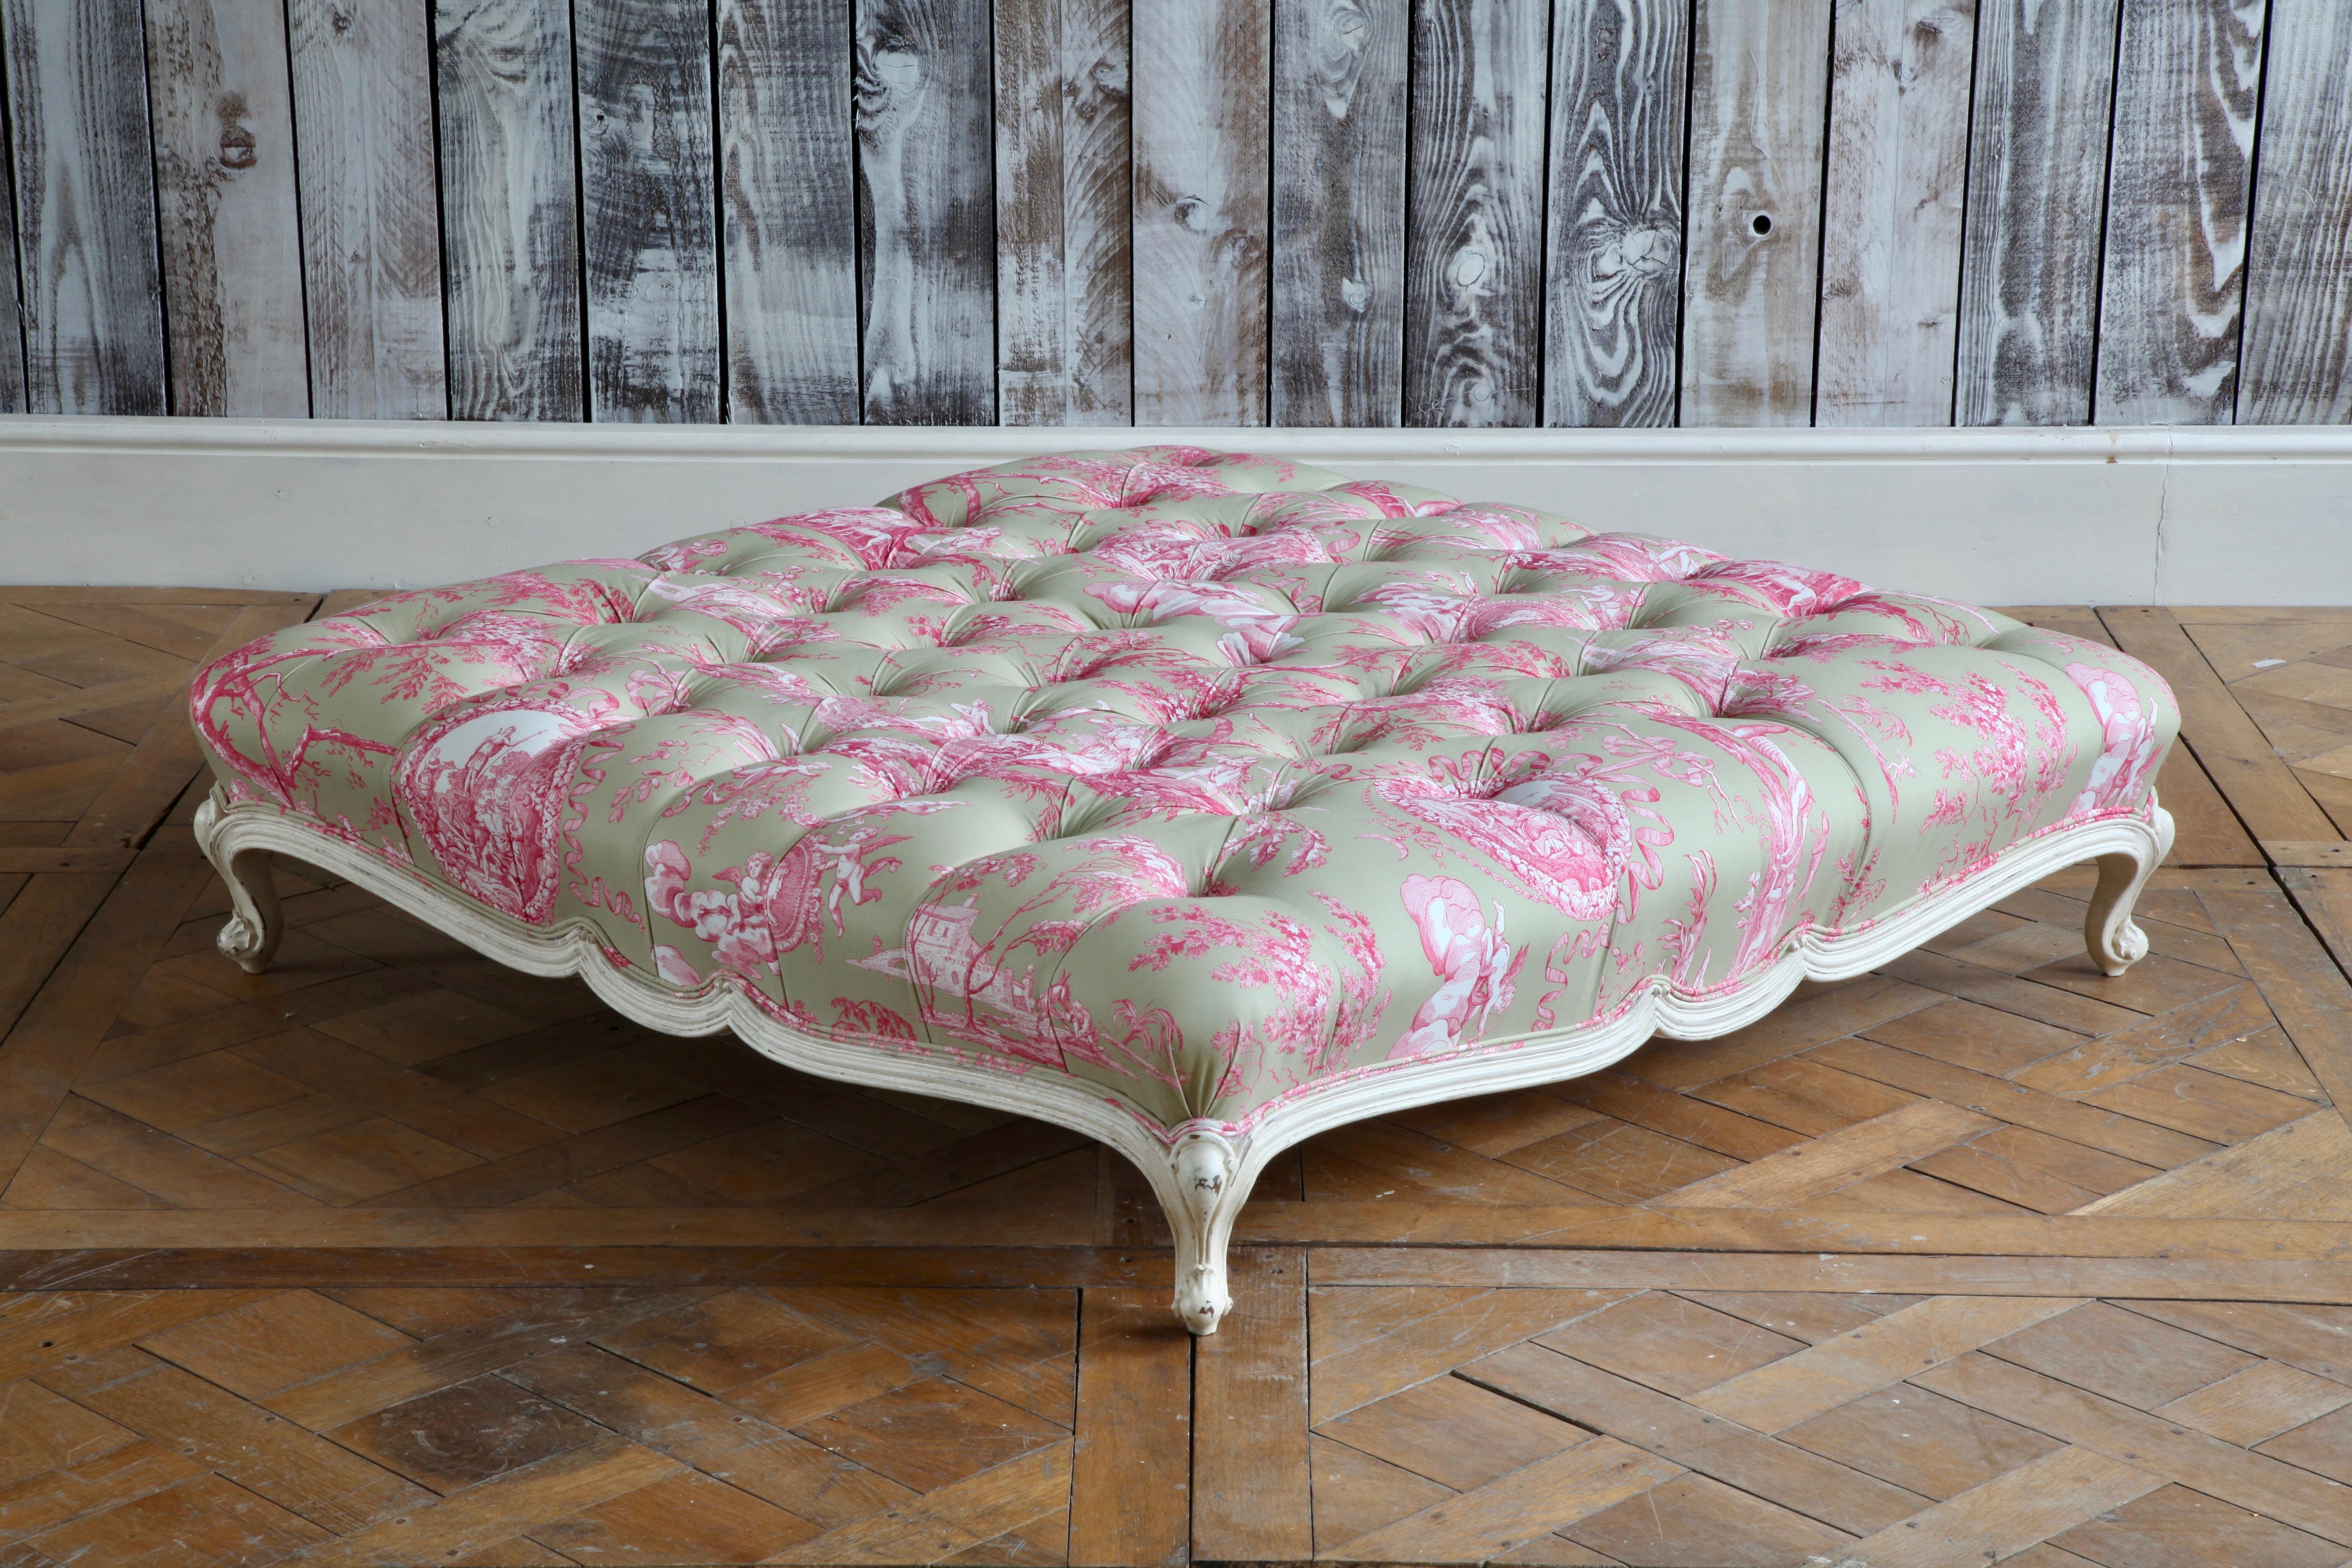 Louis XV style coffee table made by La Maison London.
Rocaille revival style, hand-carved in solid wood, finished in hand-painted gesso white.
Deep button upholstery with a raspberry and olive toile de Jouy.
Bespoke finishes available on